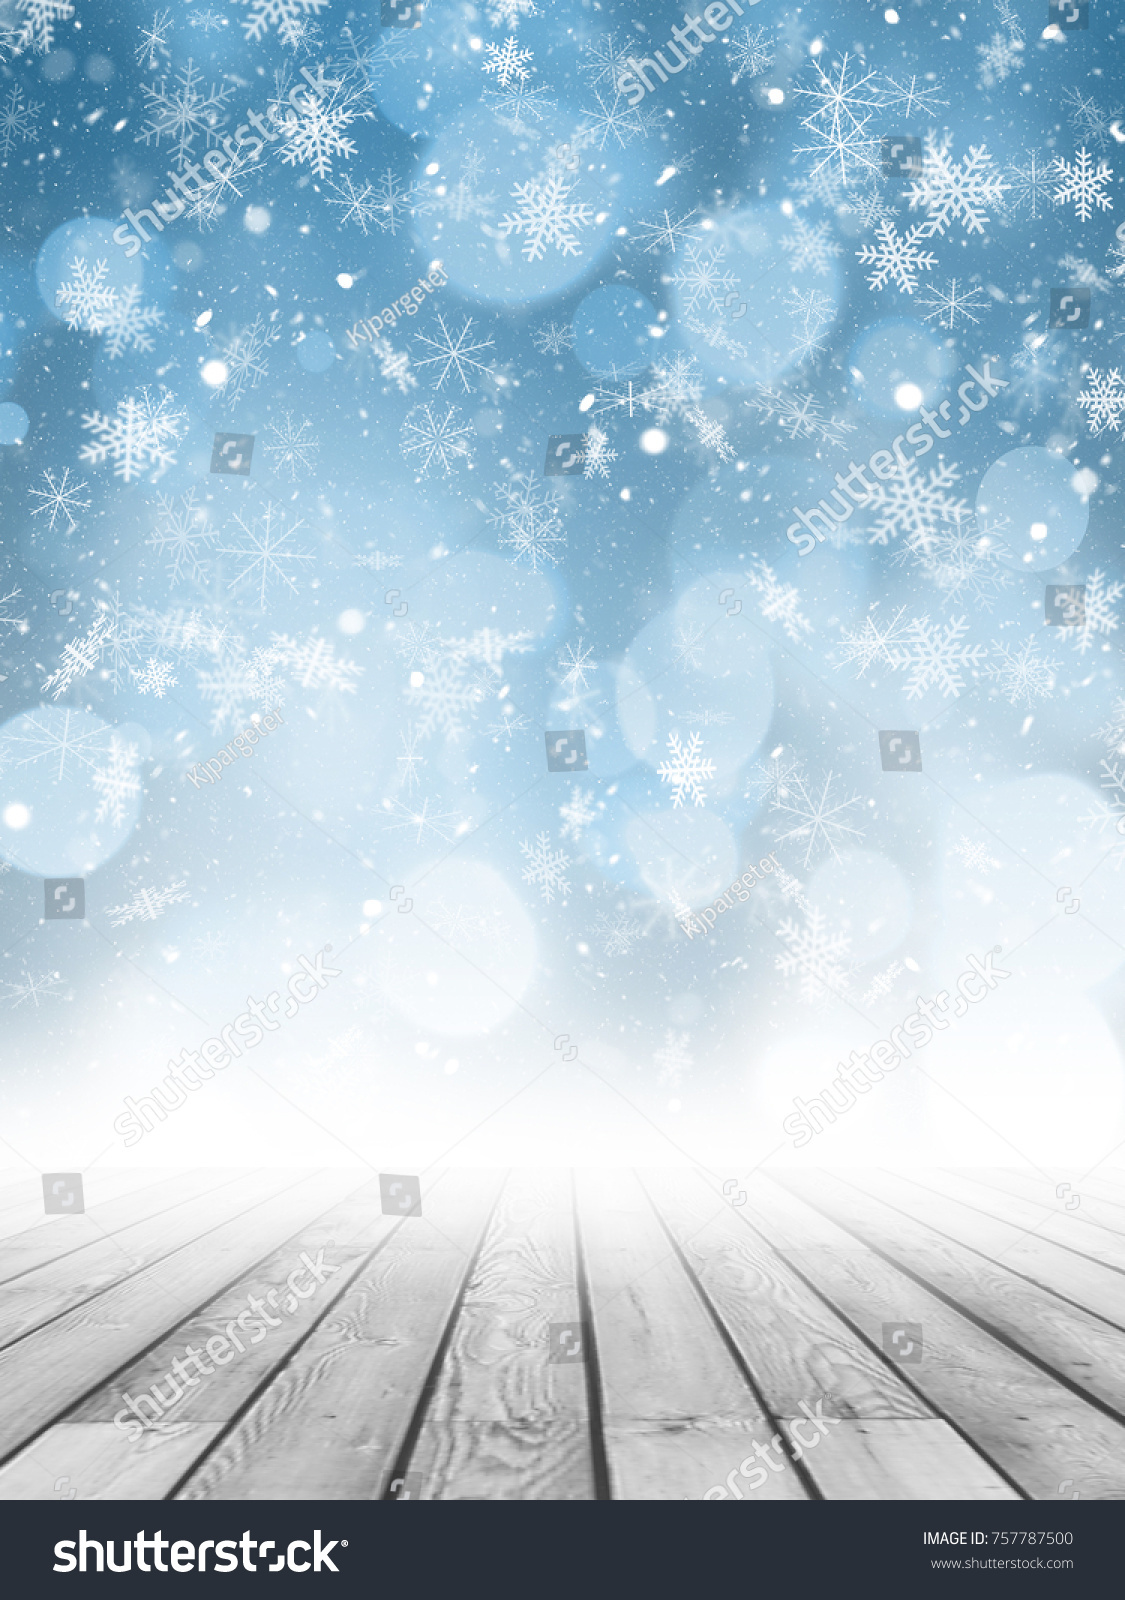 Christmas photography backdrop with wooden floor and snowflake background #757787500